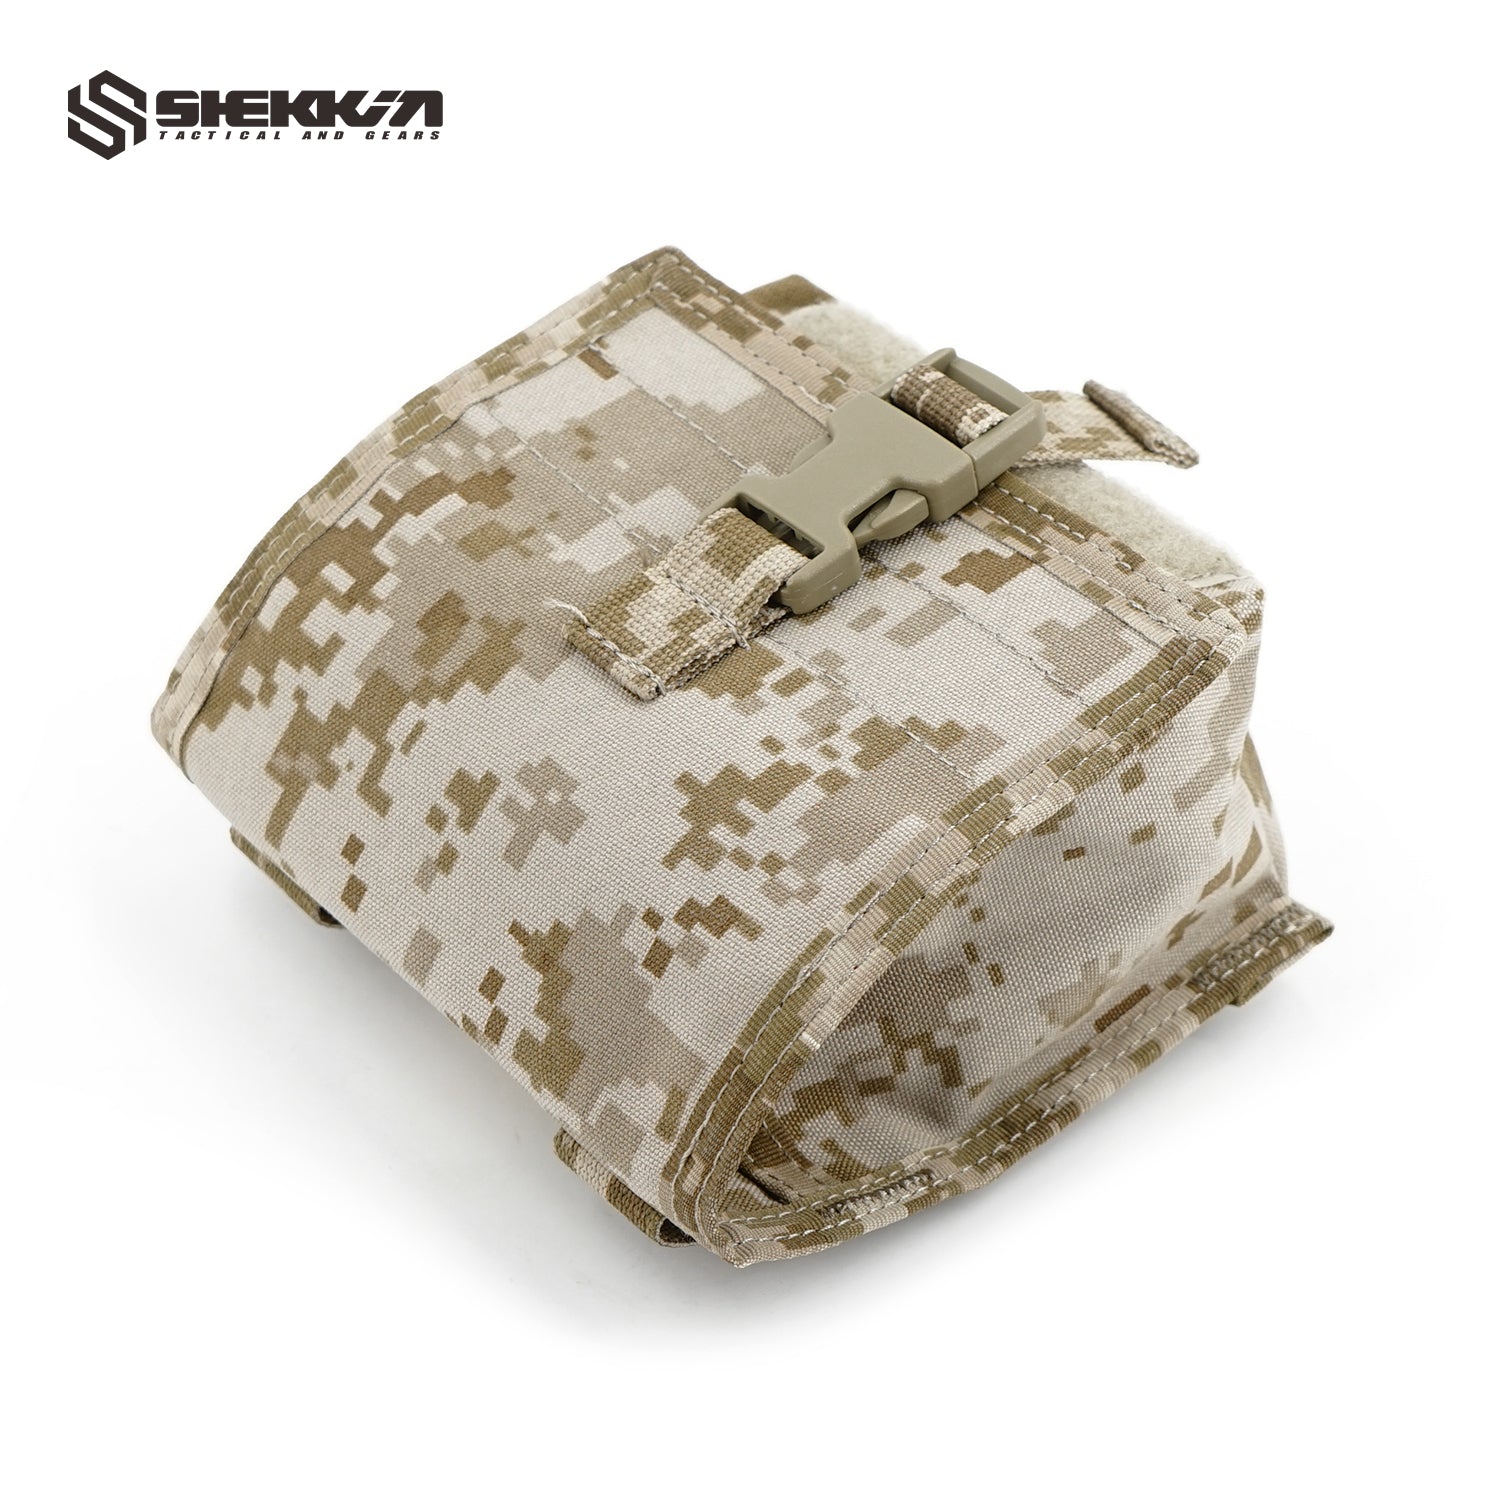 LBT style 6074 AOR1 NVG pouch